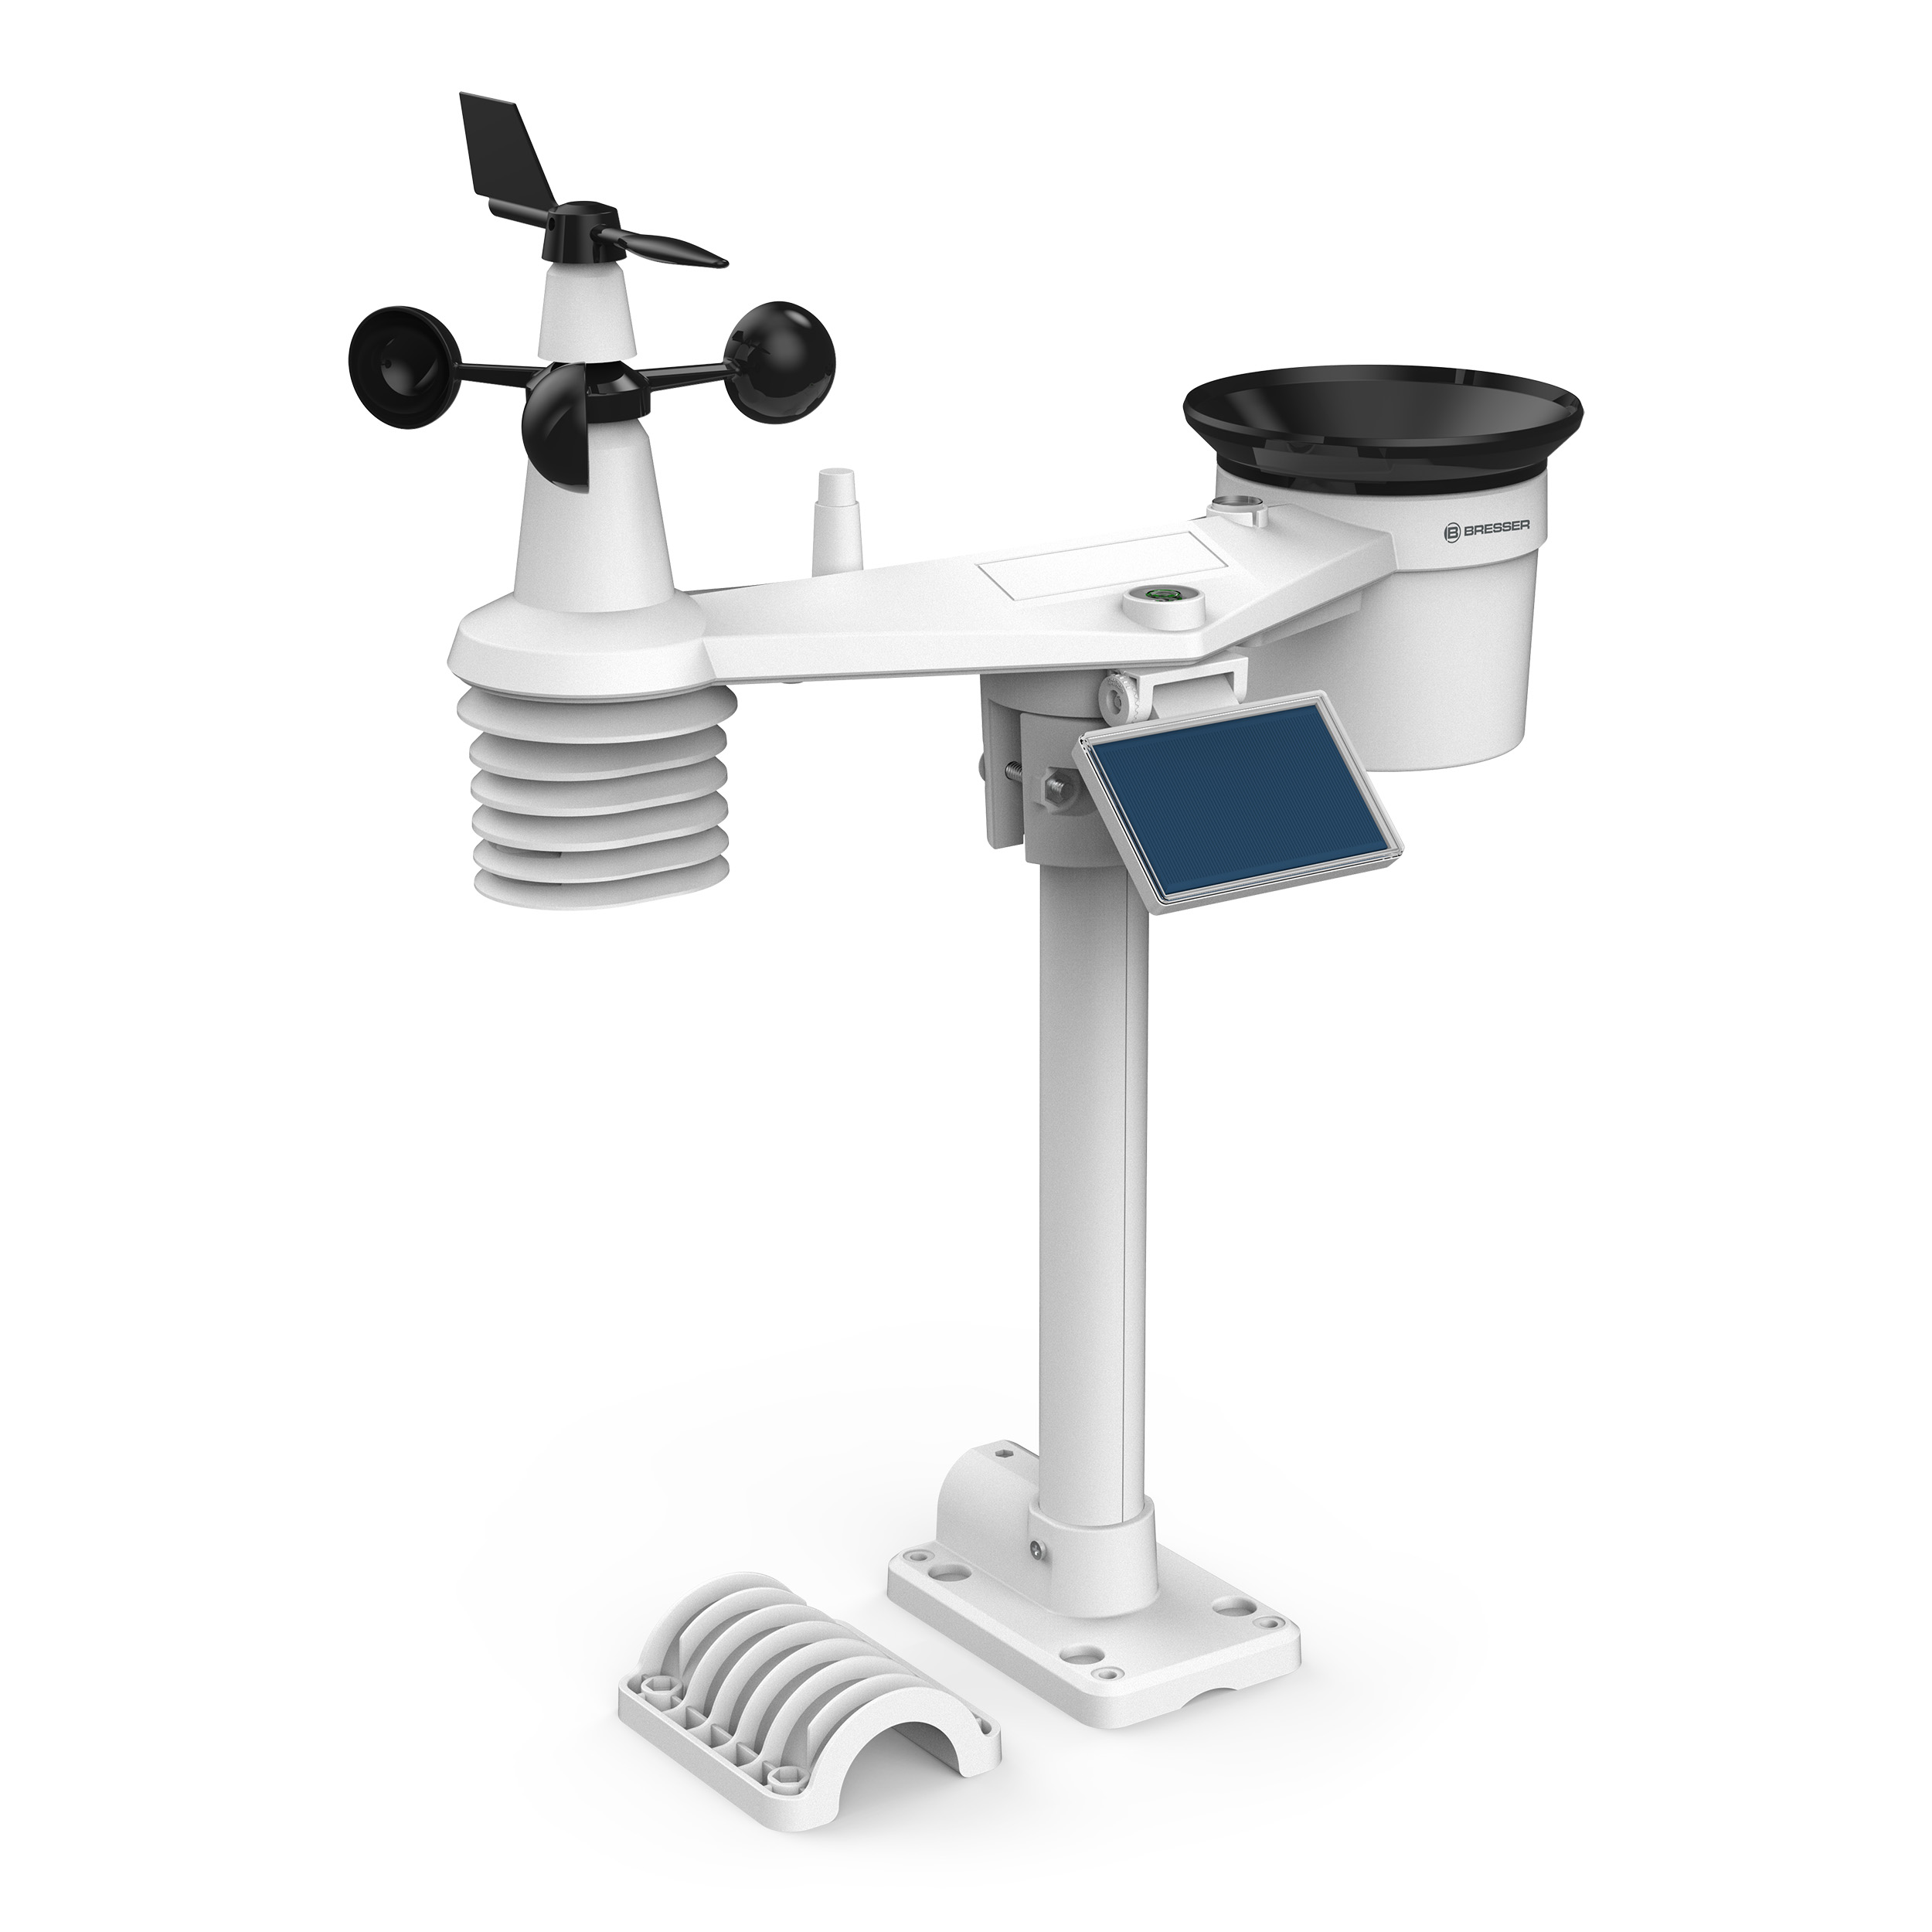 BRESSER Wi-Fi HD TFT Professional Weather Station with 7-in-1 Sensor